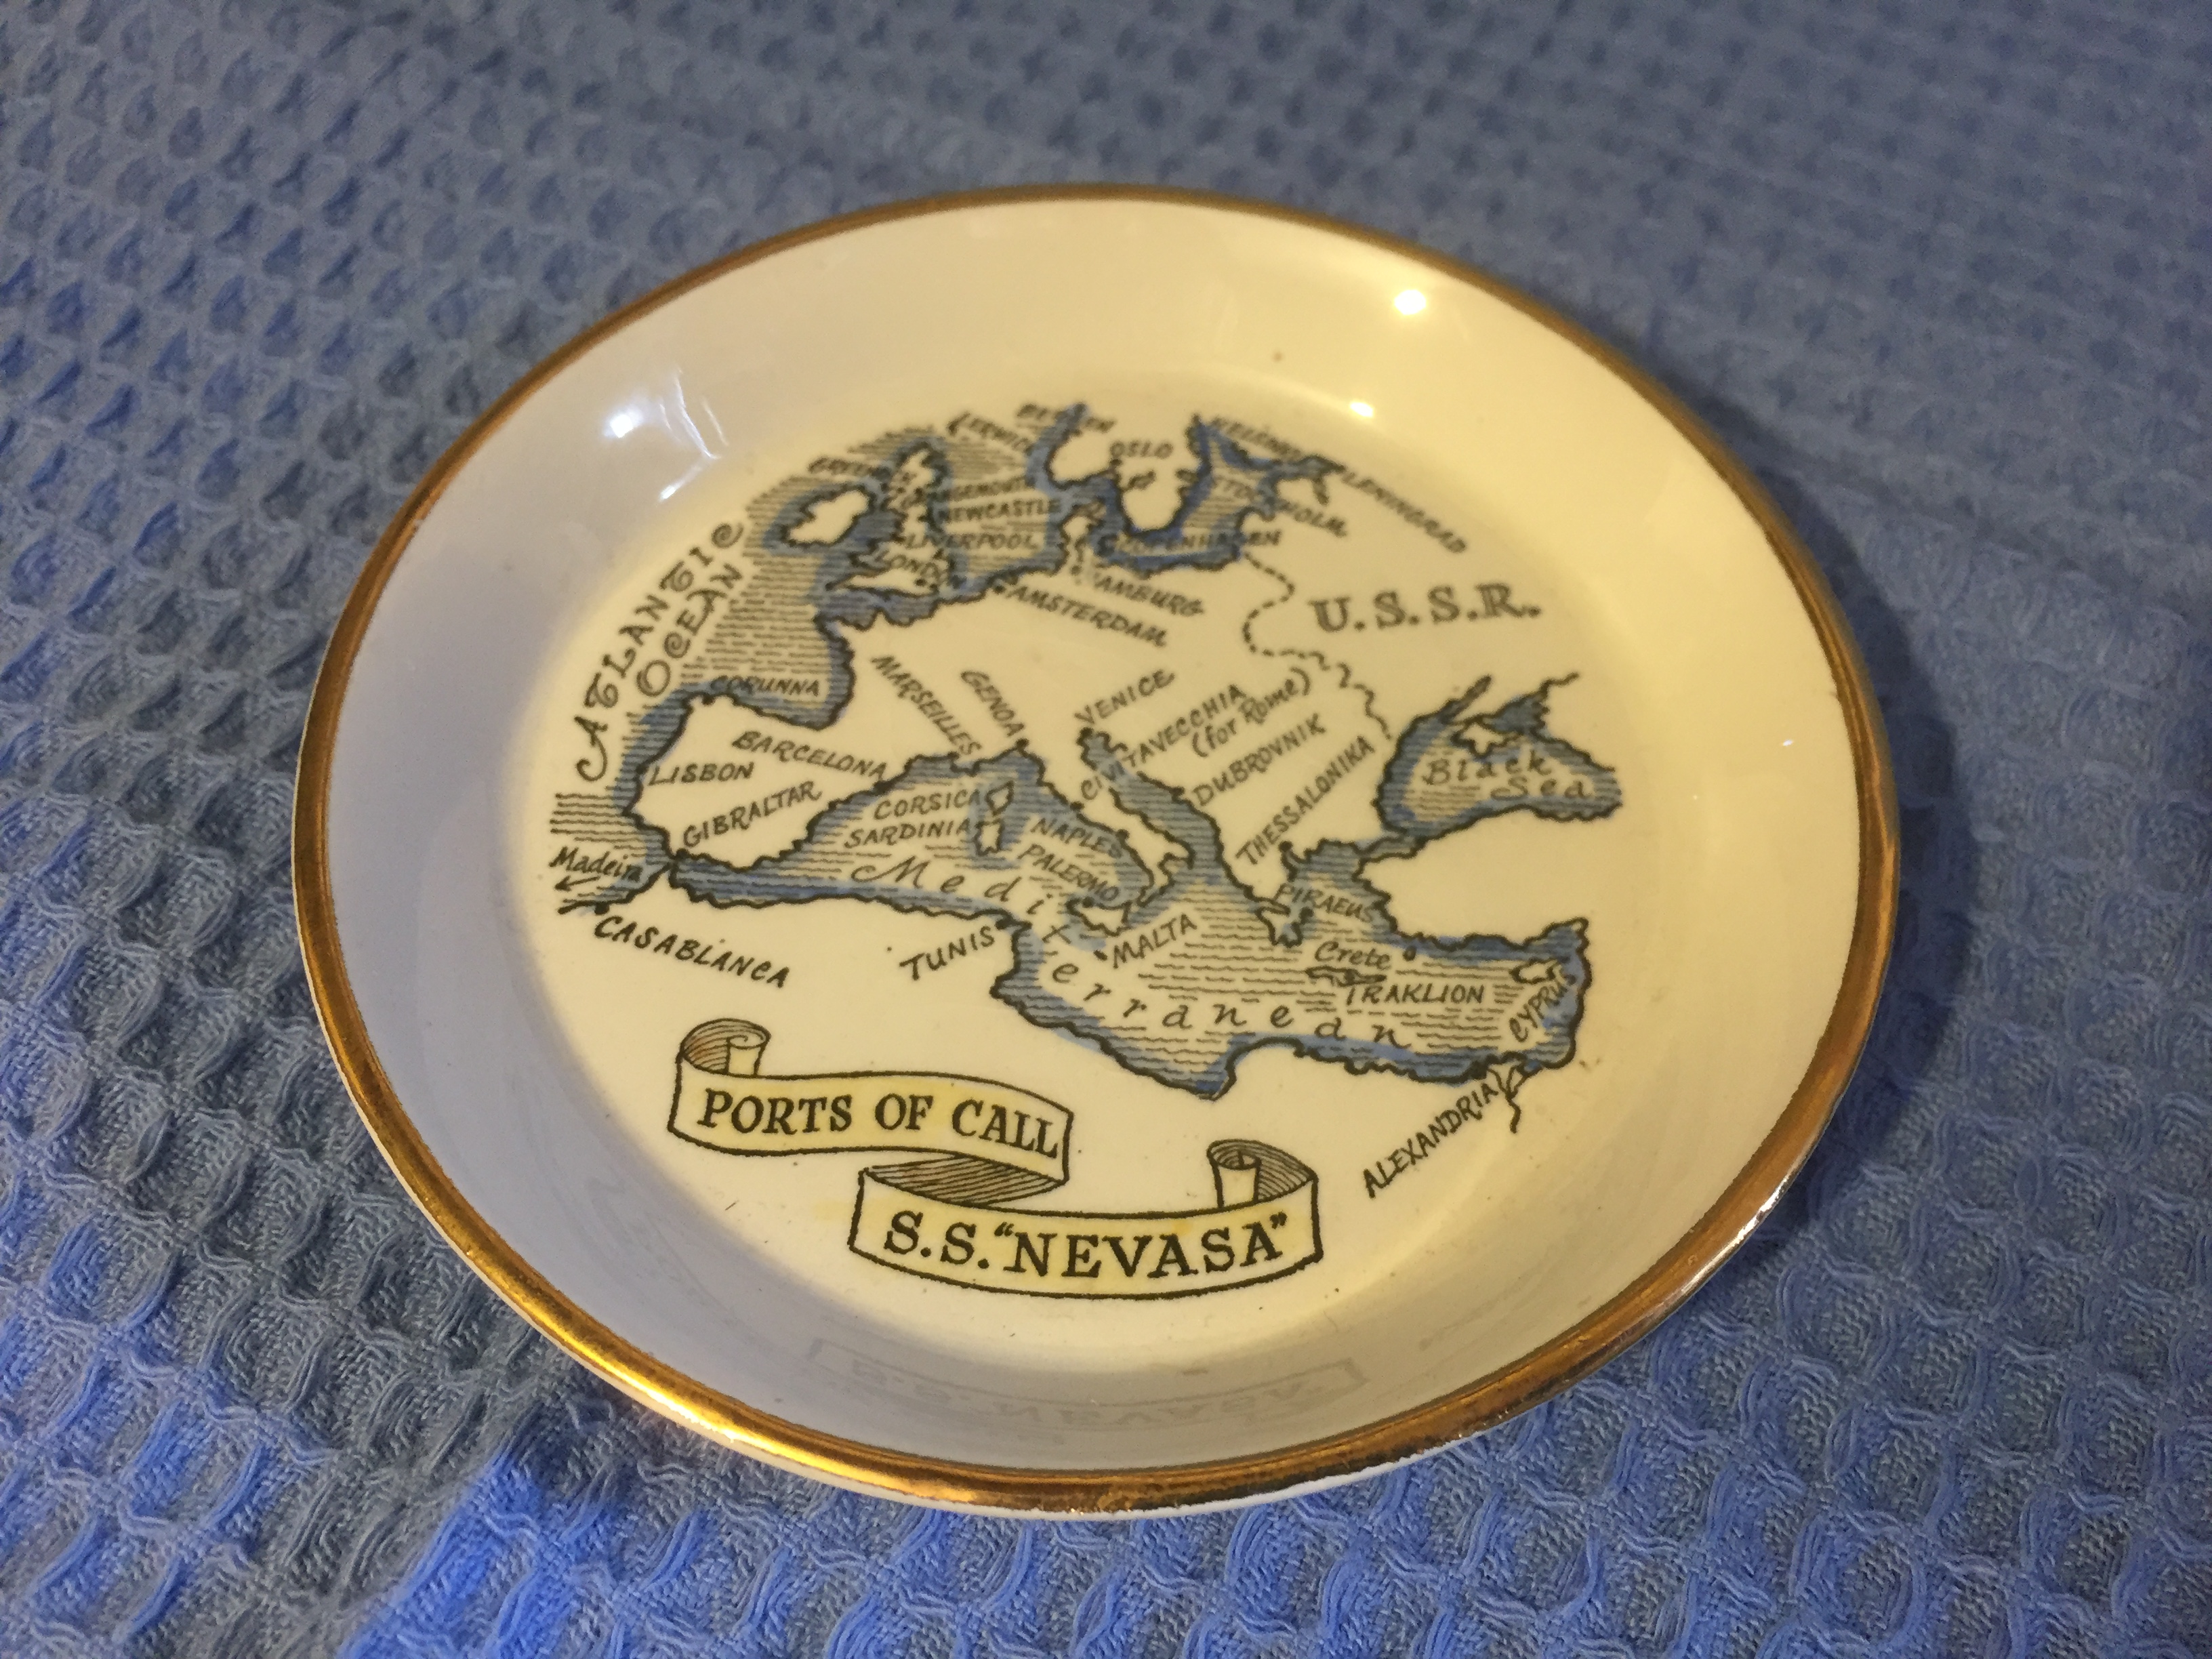 SOUVENIR MAP DISH FROM THE B.I.S.N.Co. VESSEL THE SS NEVASA